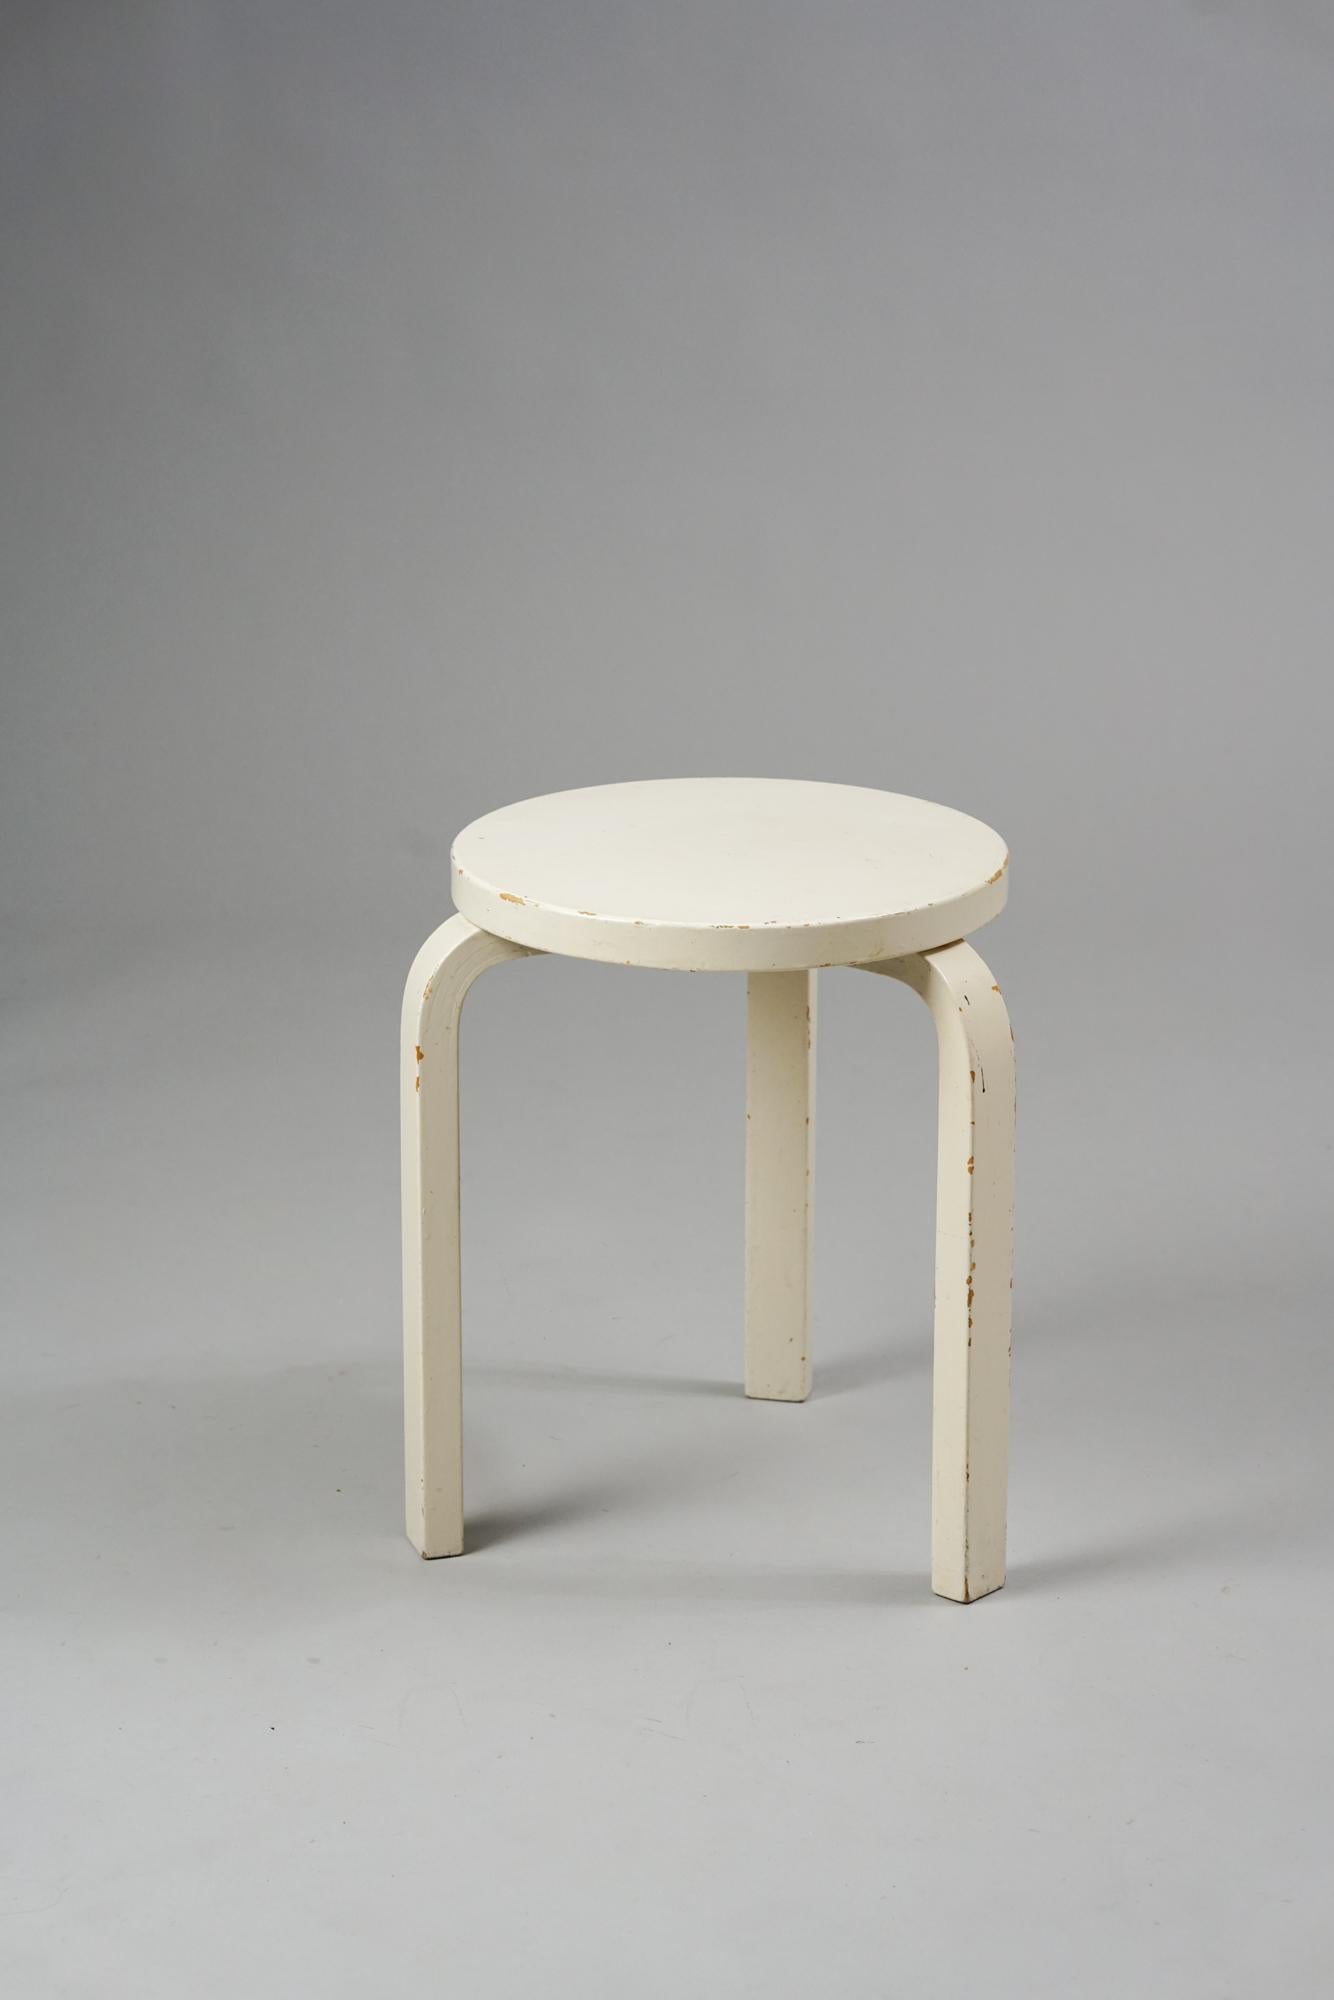 Alvar Aalto Model 60 Stool, circa 1940s. Manufactured by O.Y Huonekalu- ja Rakennustyötehdas A.B in Finland. Bent solid birch and birch plywood. Heavy patina.

The model 60 stool was first introduced in 1933 in the Fortnum and Mason's Exhibition